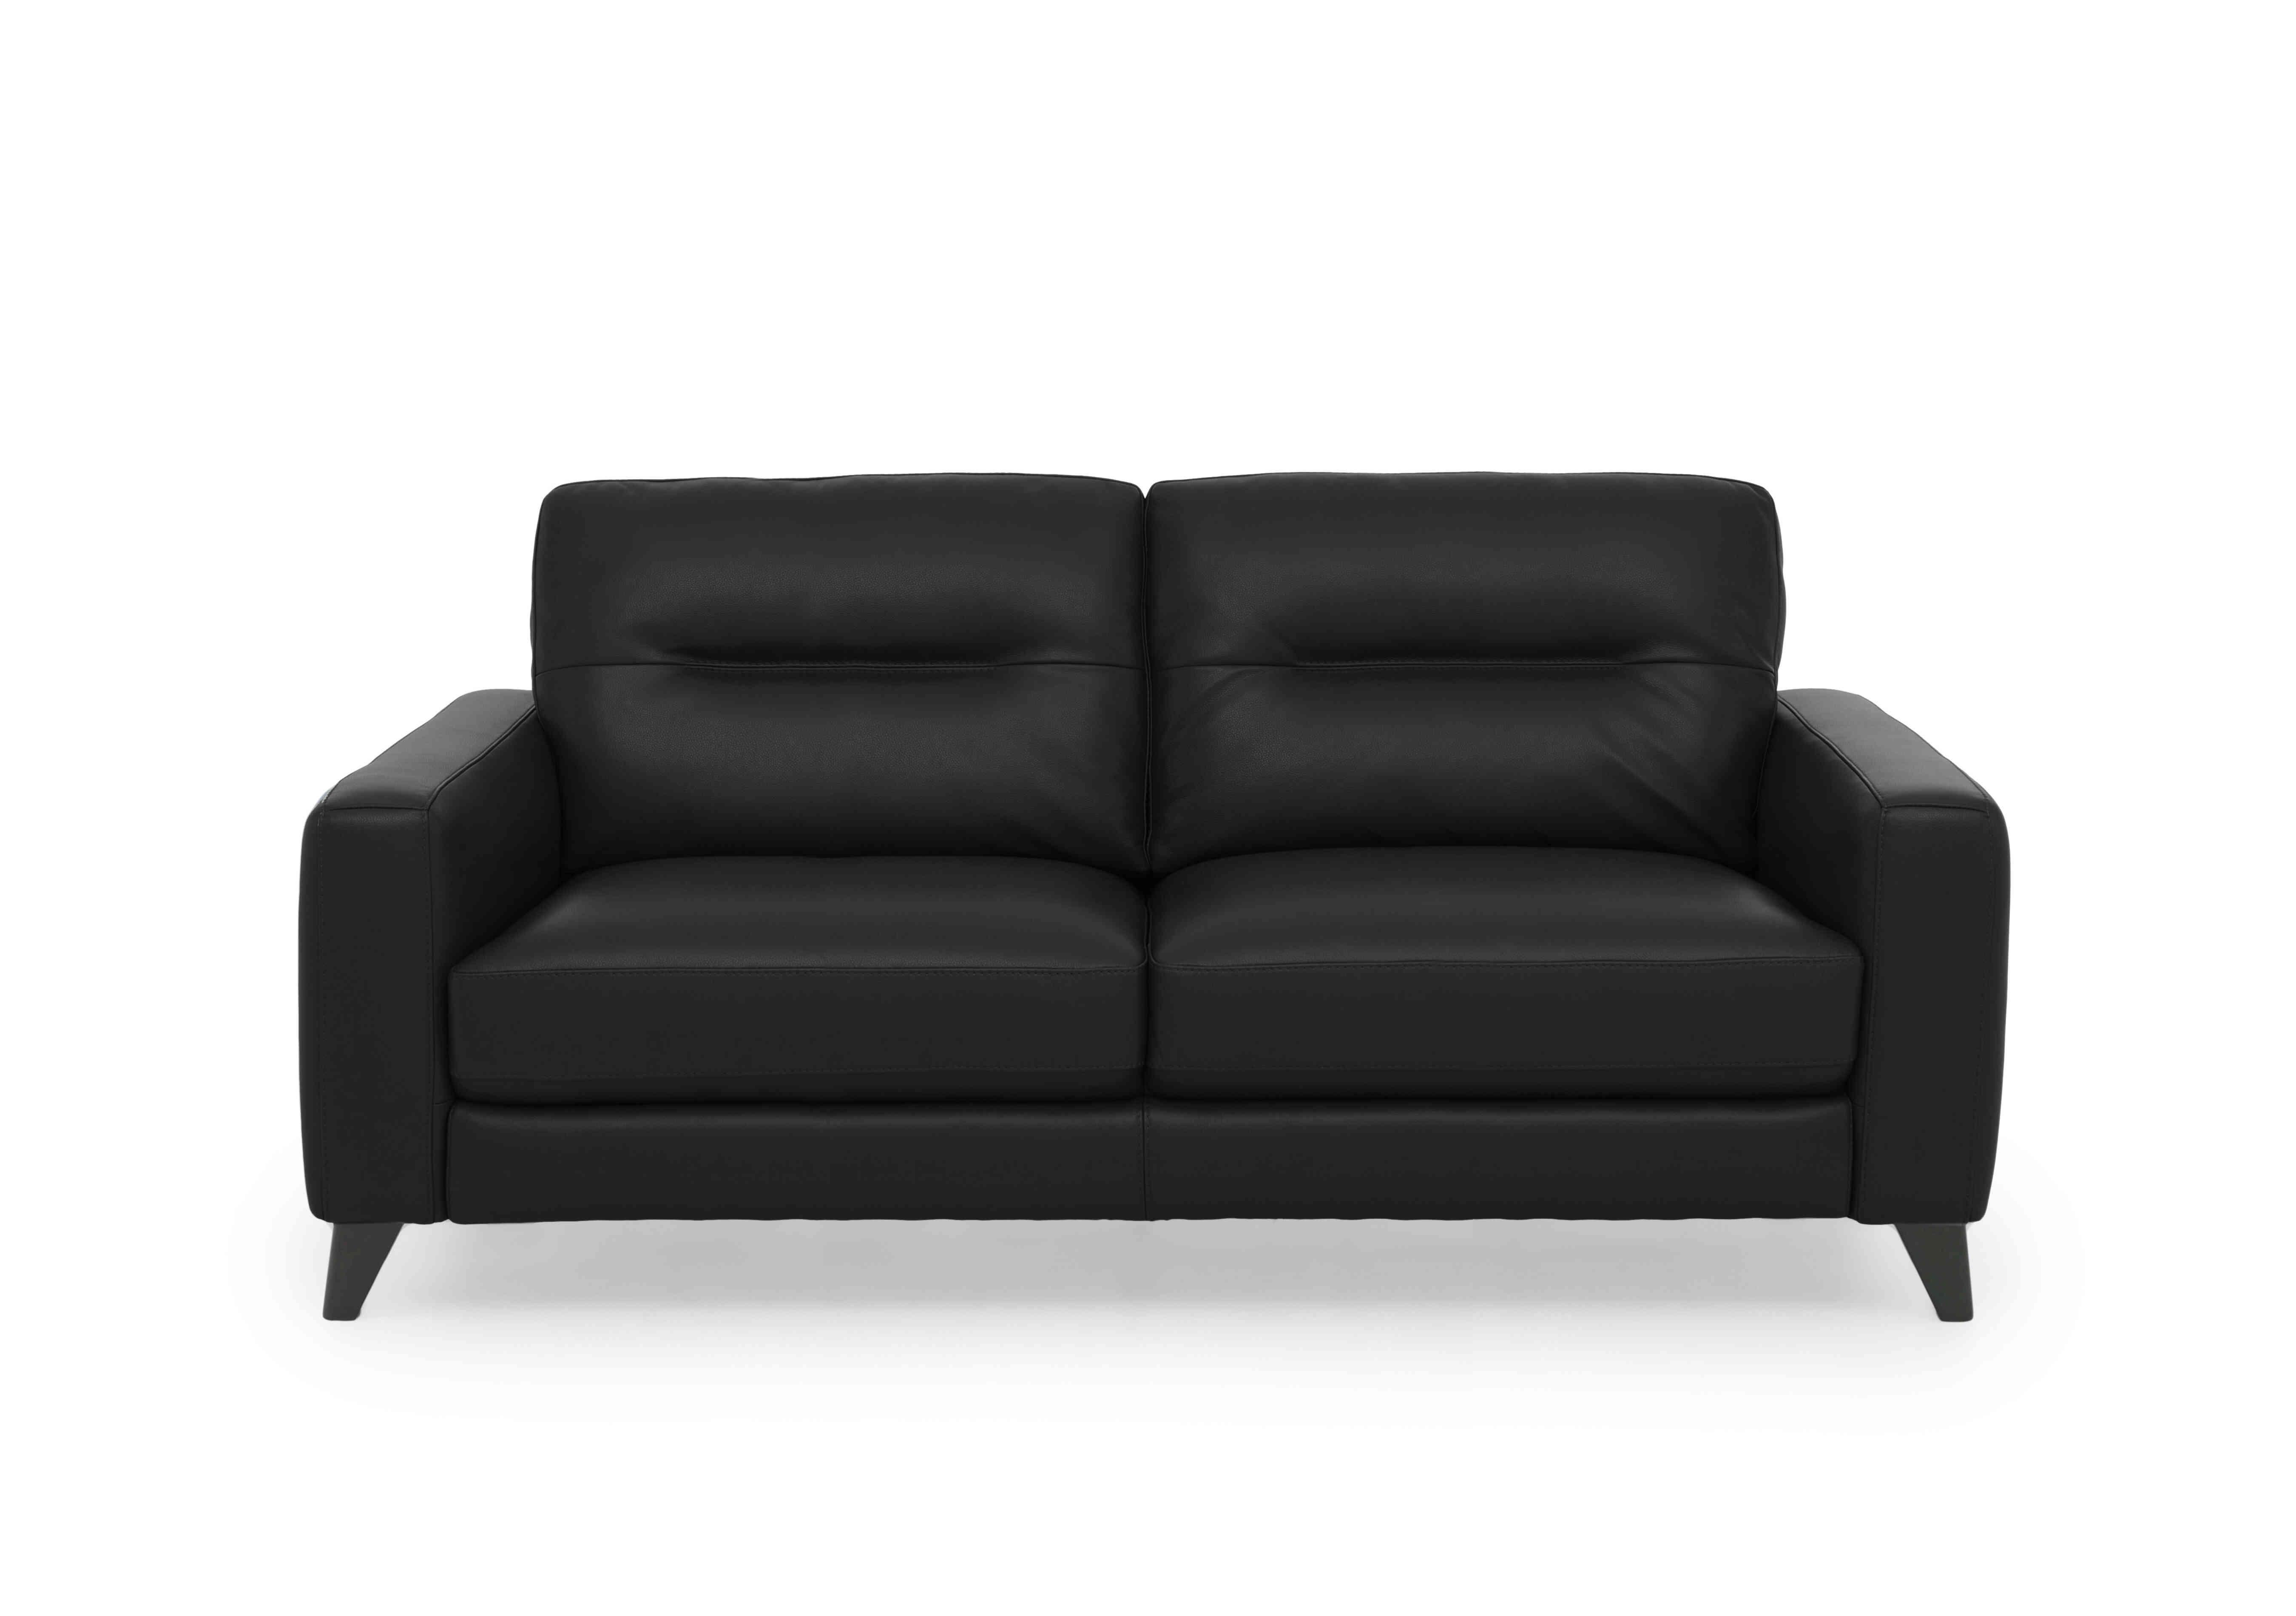 Jules 3 Seater Leather Sofa in An-671b Black on Furniture Village